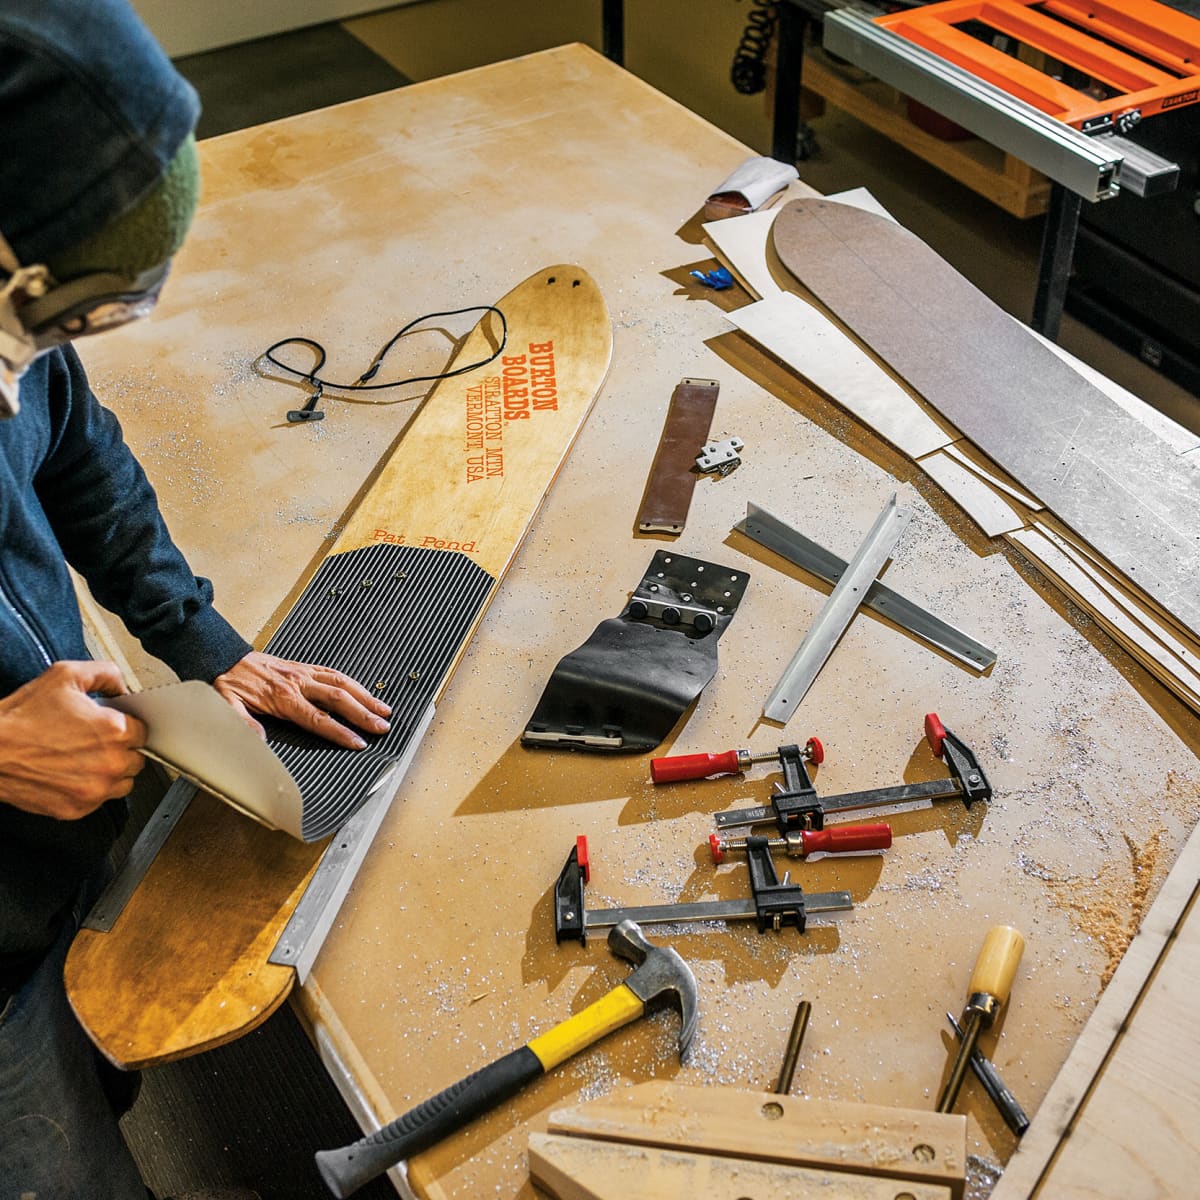 How A Counterfeit Vintage Snowboard Almost Sold For $21,700 